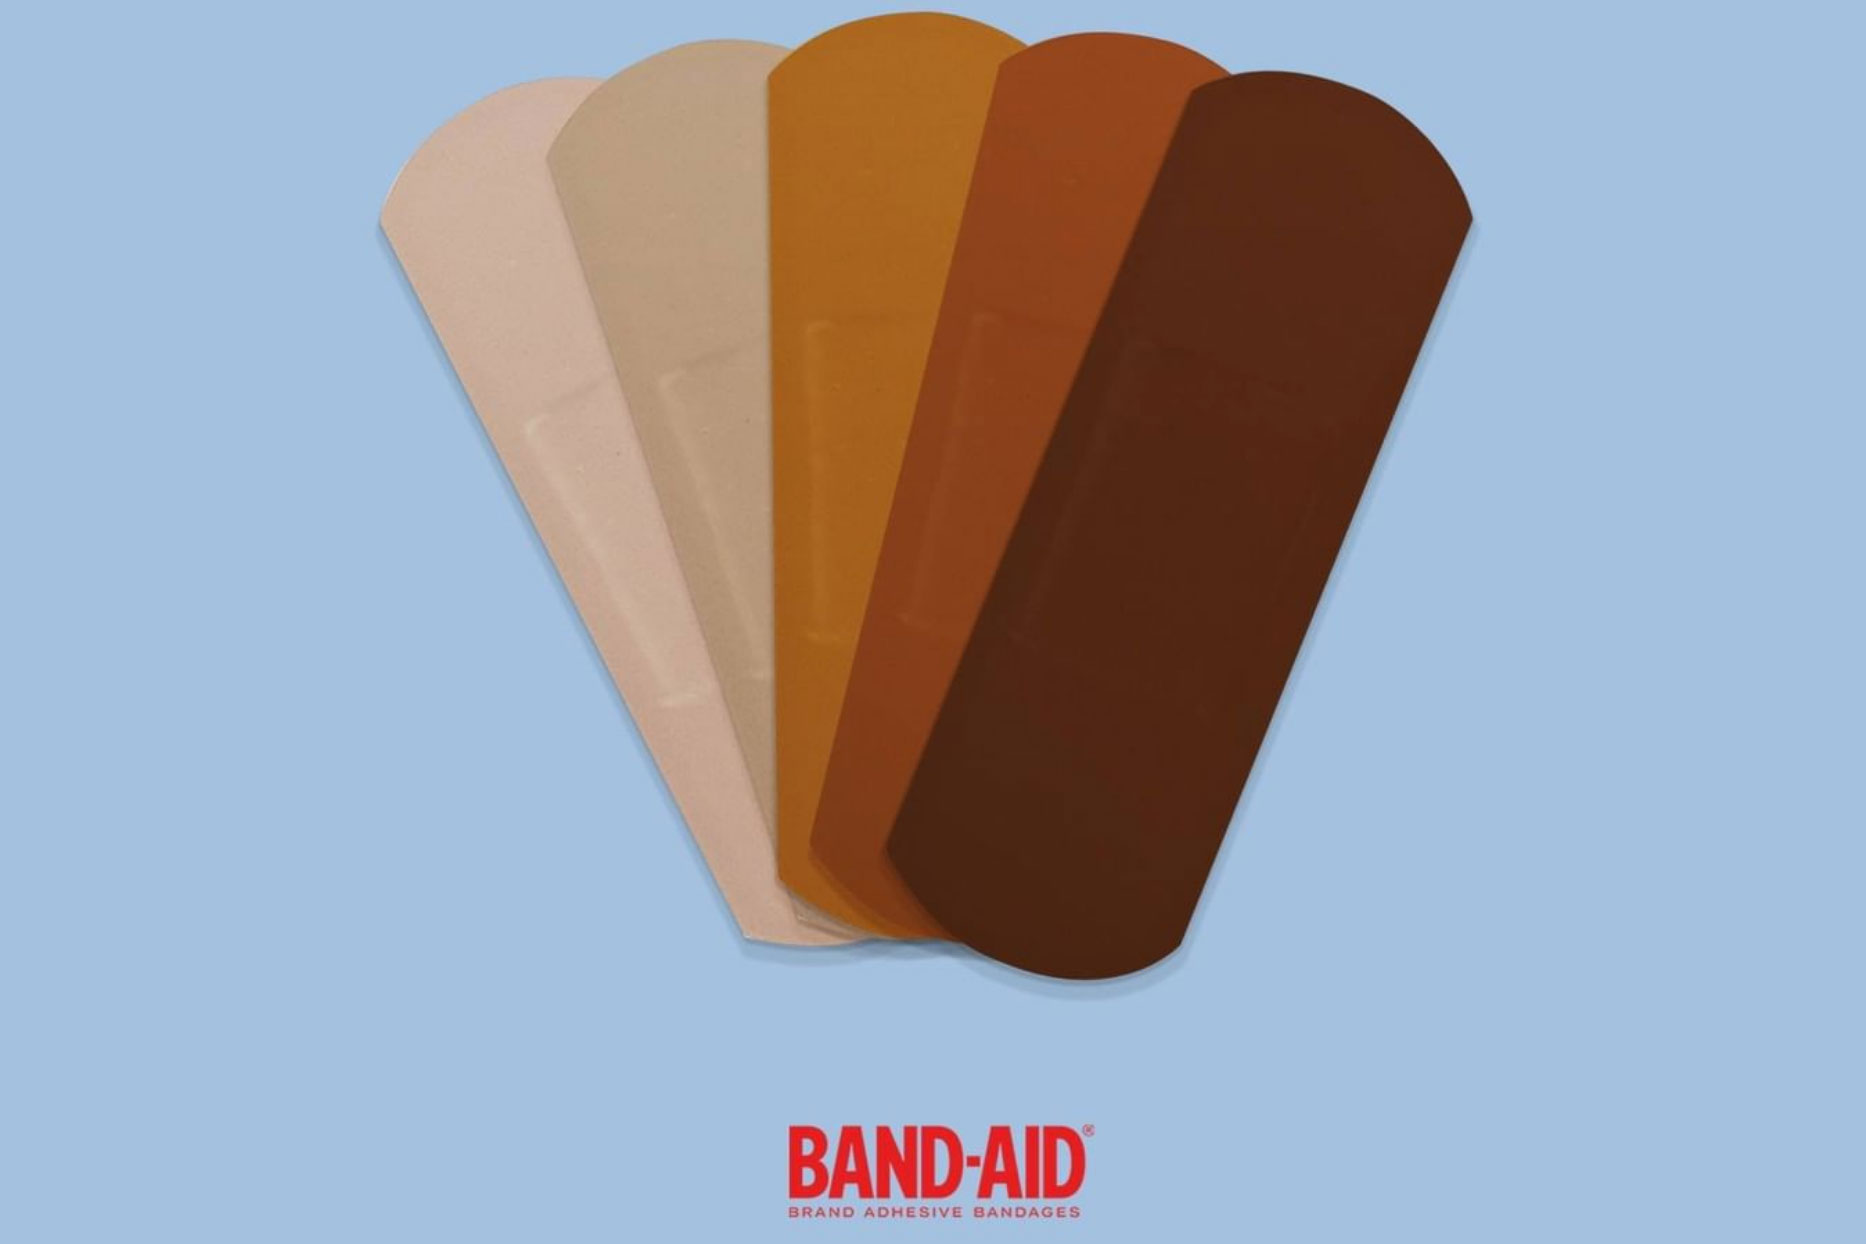 Band-aid announces its product range will include bandages with a range of skin tones